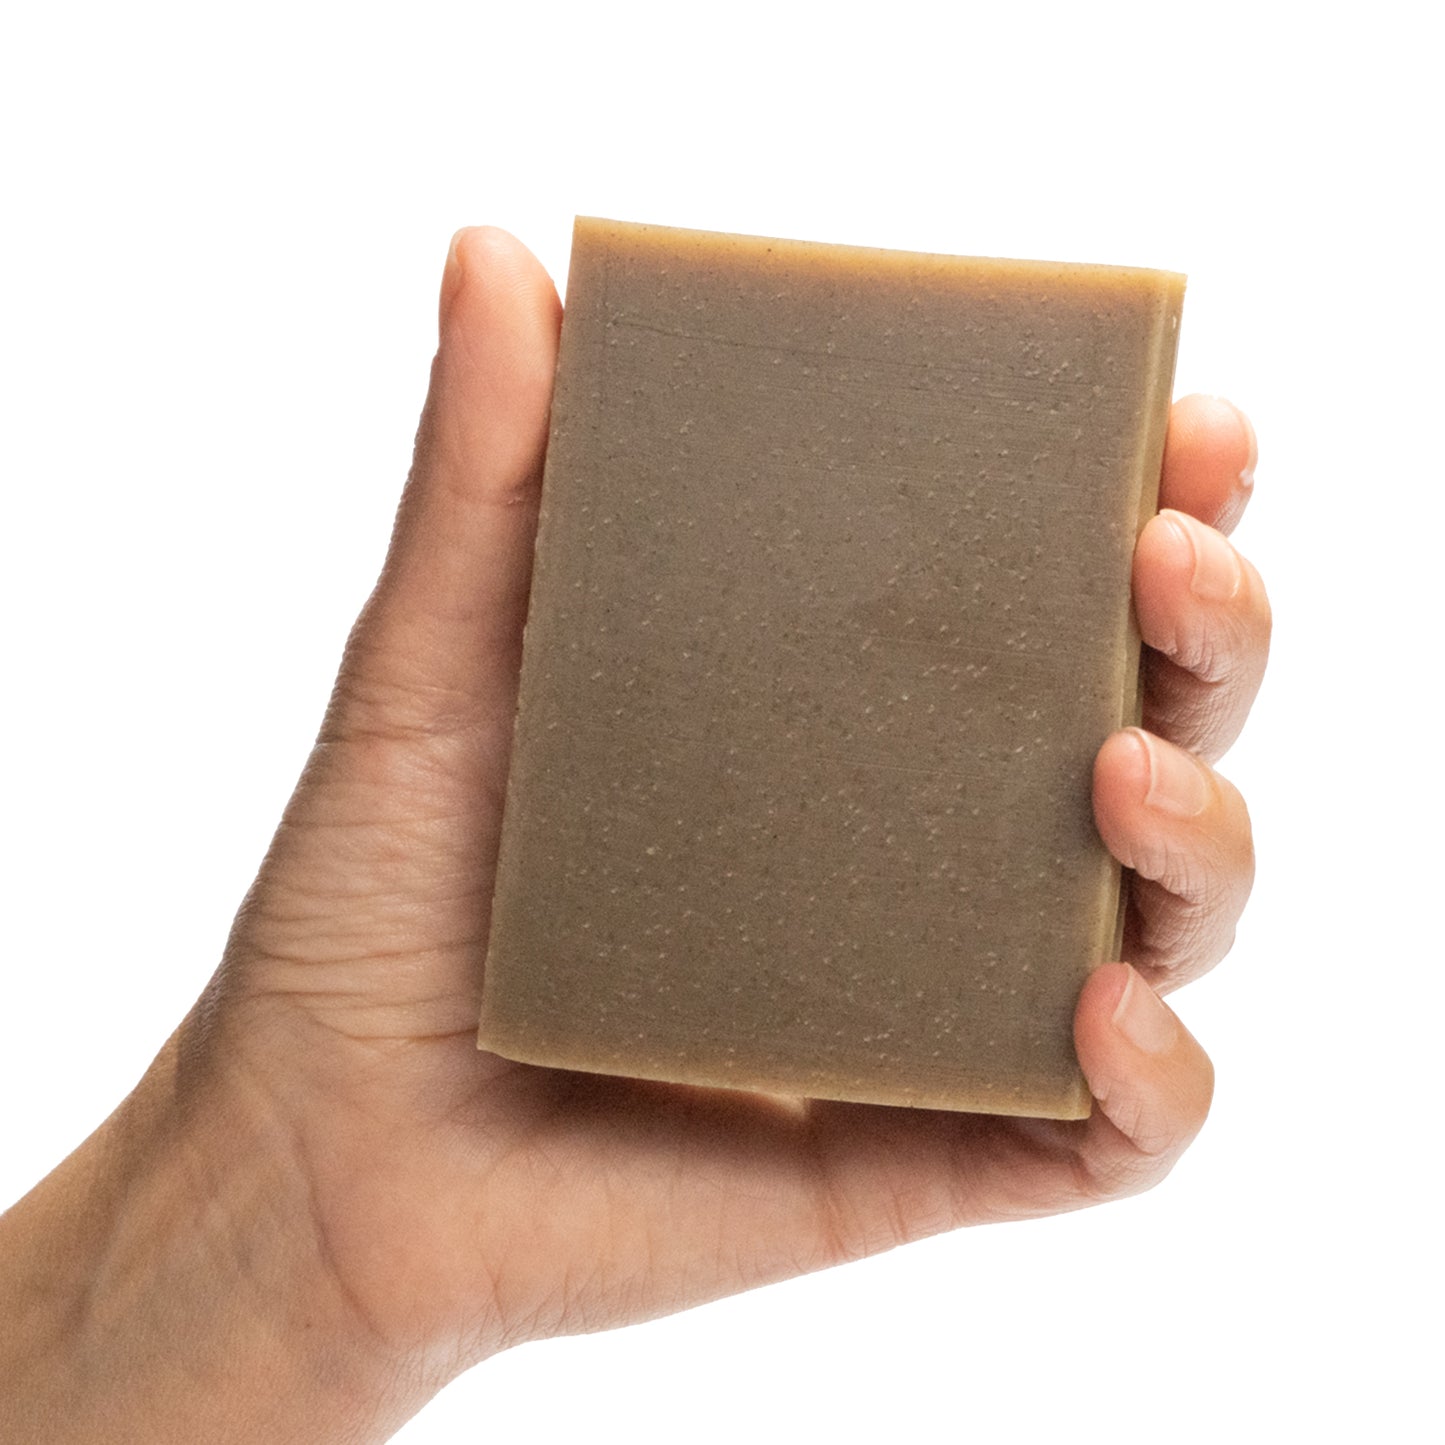 Aum Patchouli essential oil organic bar soap from Ground Soap. 